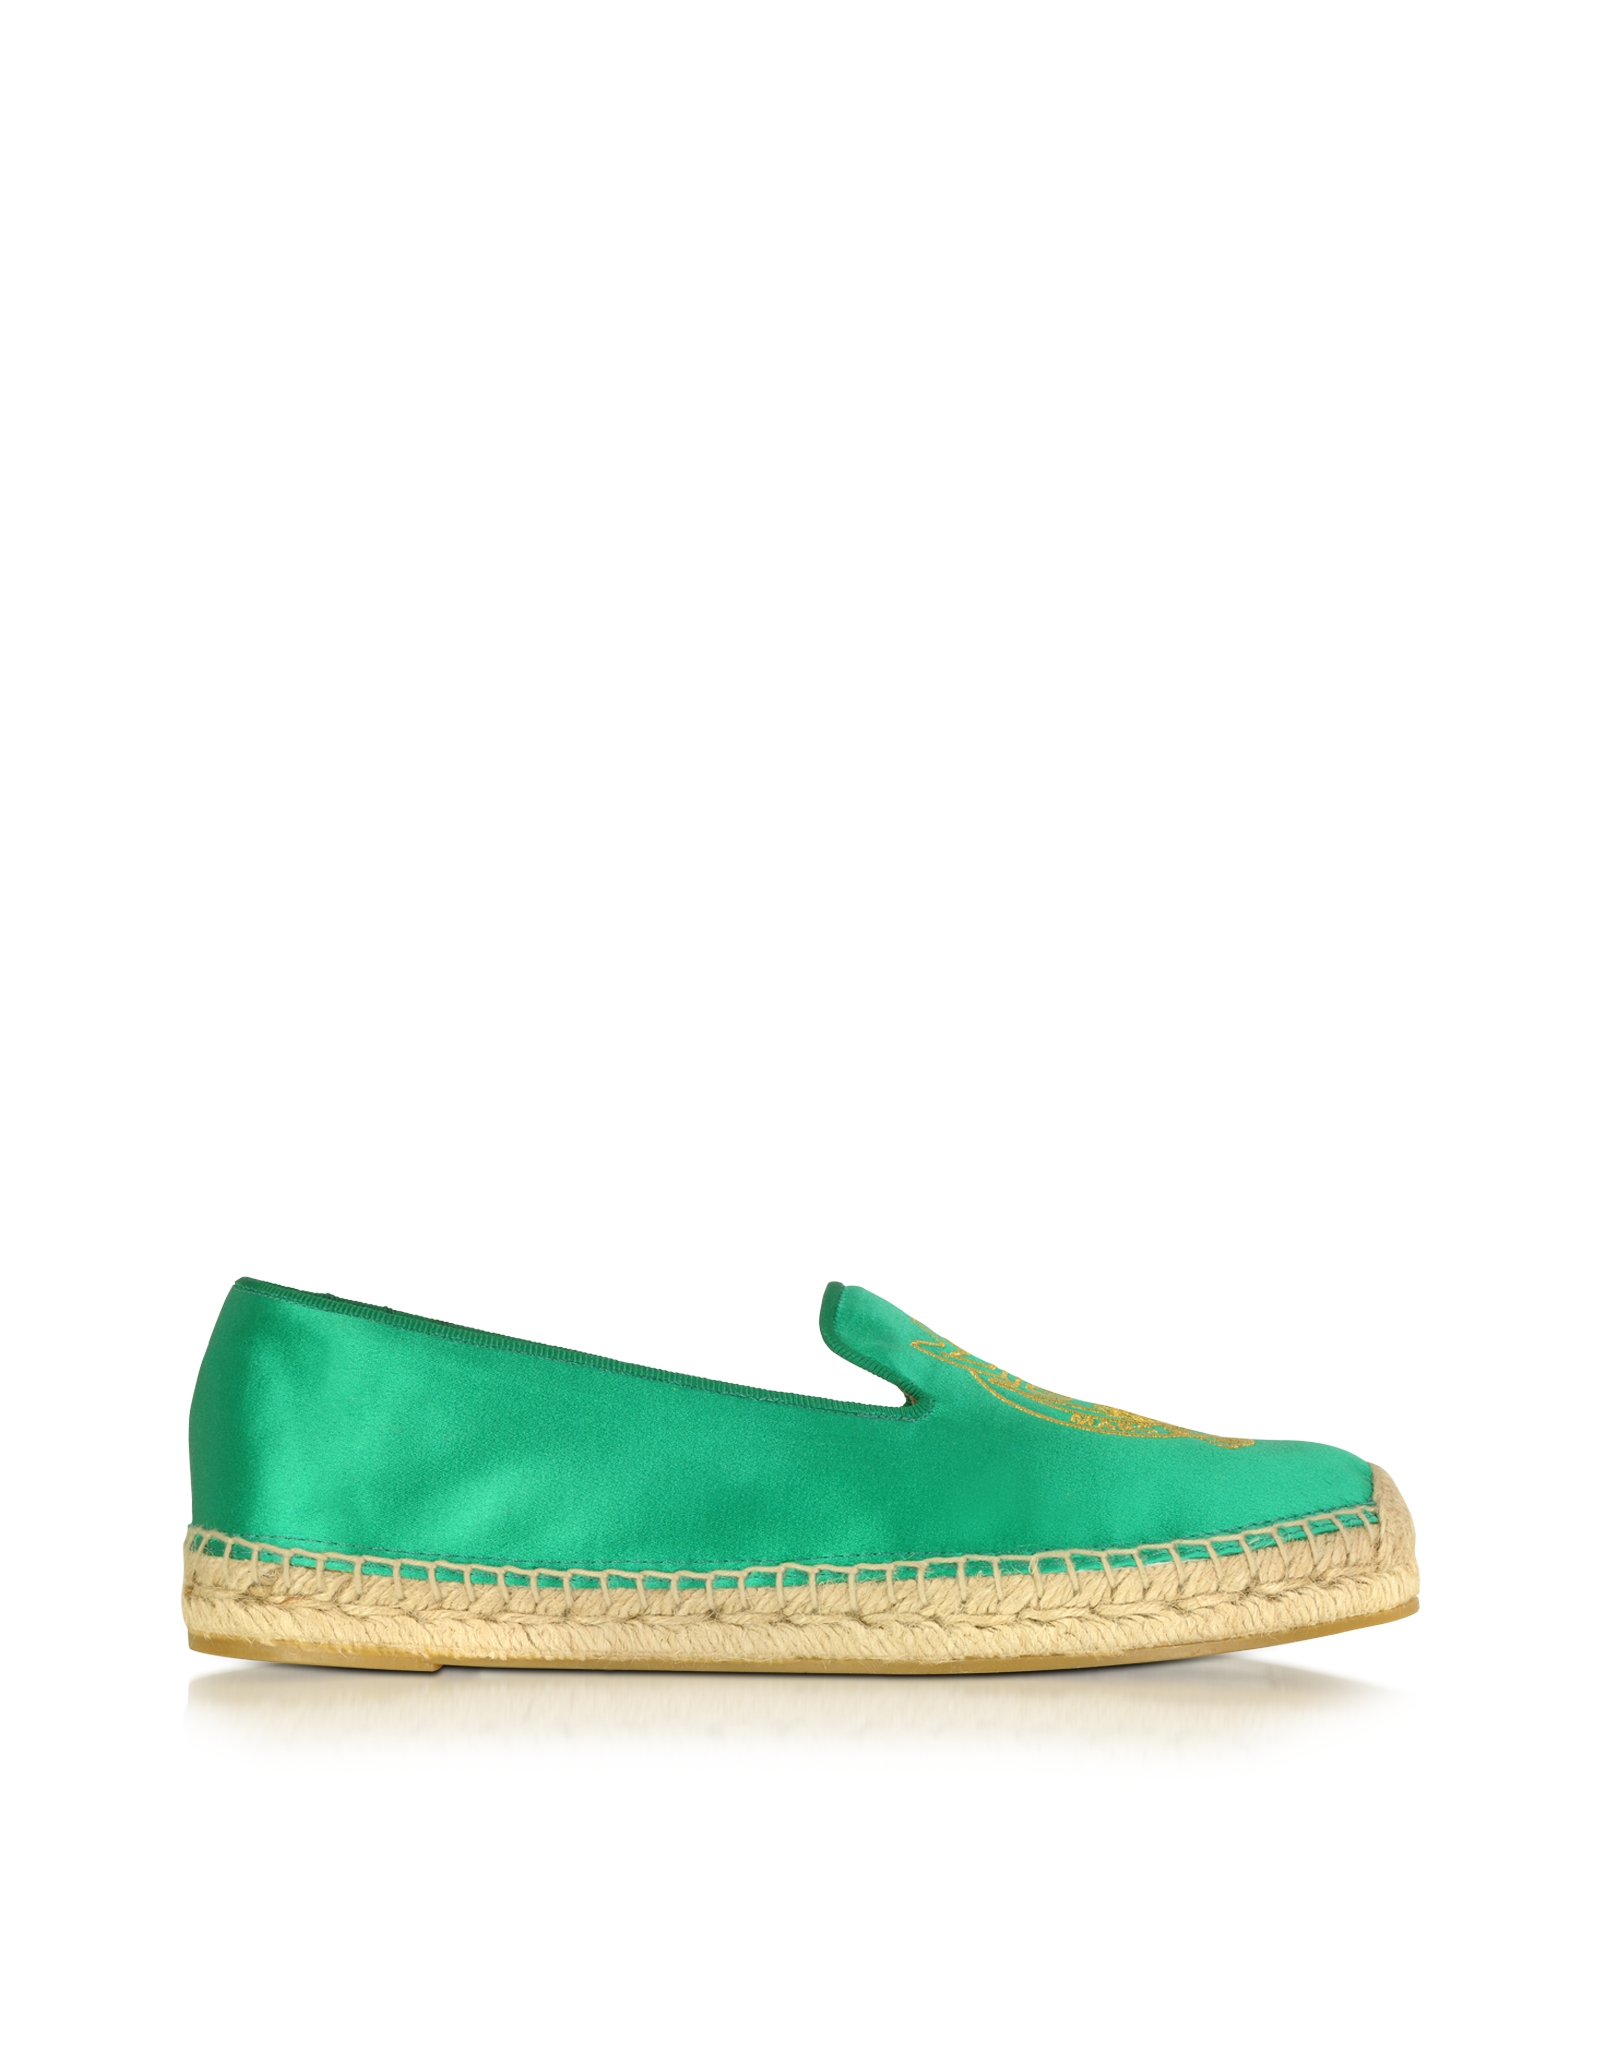 Lyst - Marc By Marc Jacobs Owl Green Satin Espadrille Flat in Green